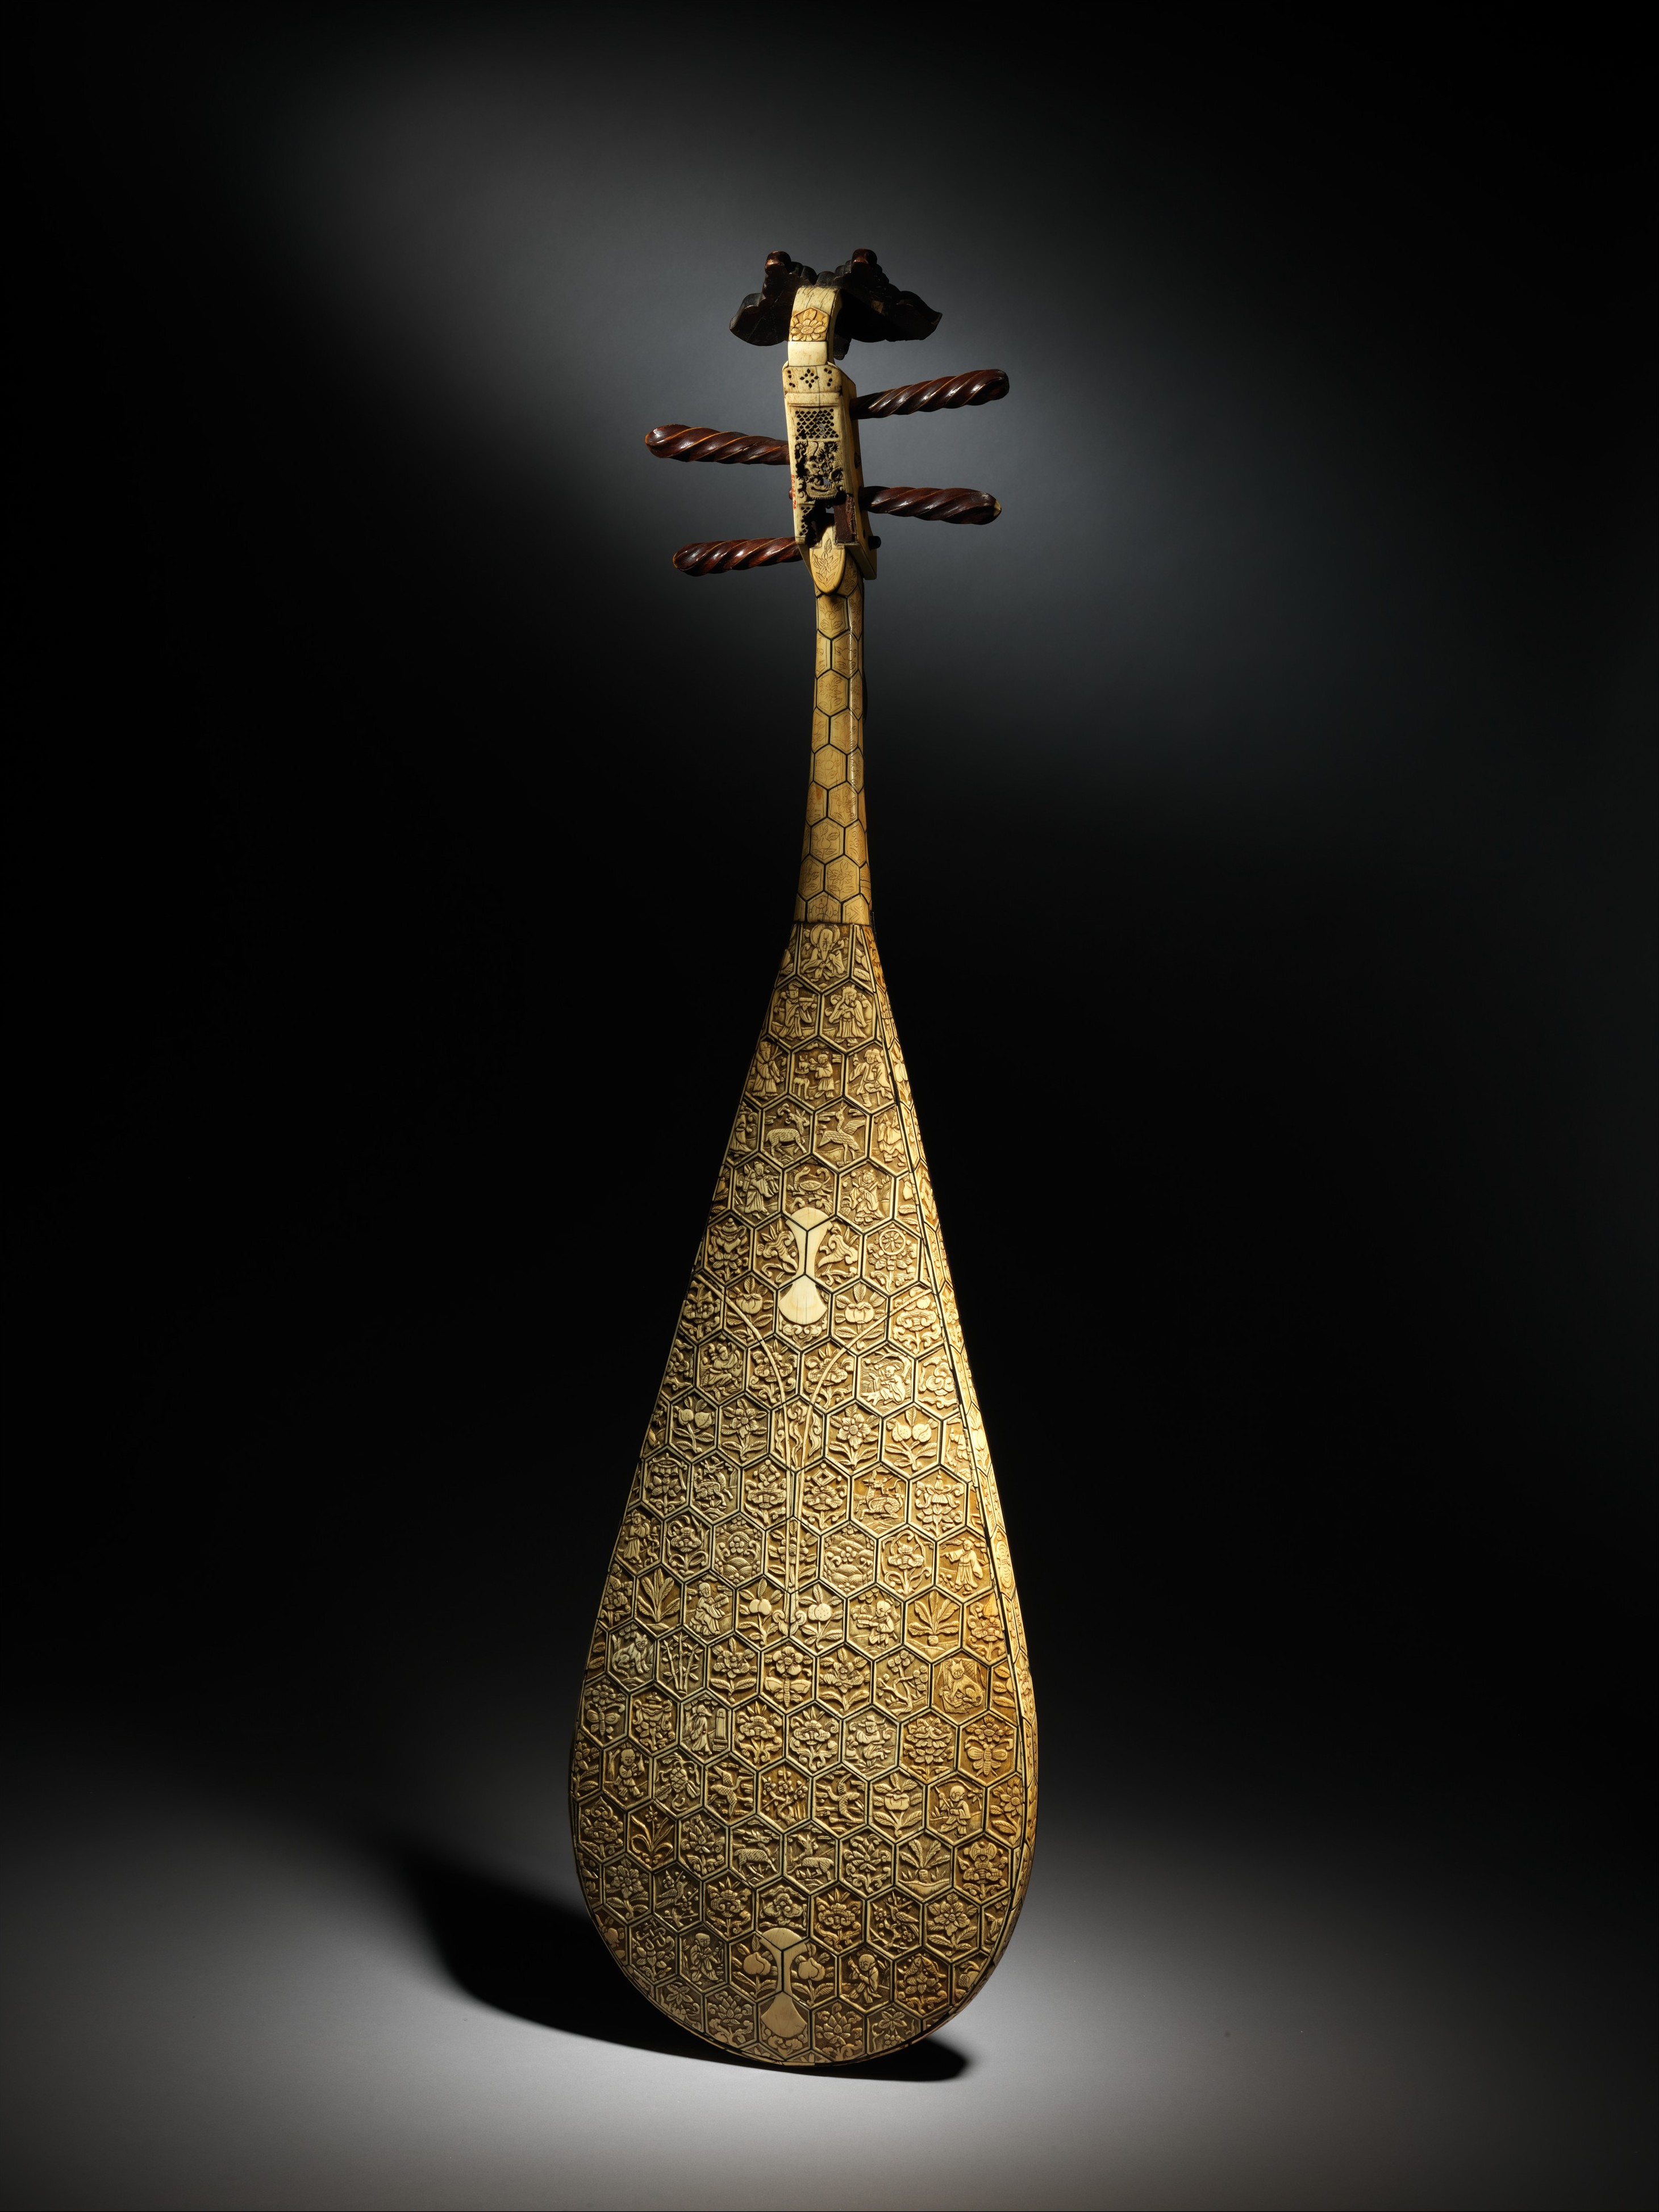 Image of a musical instrument called the pipa, from the Ming Dynasty.